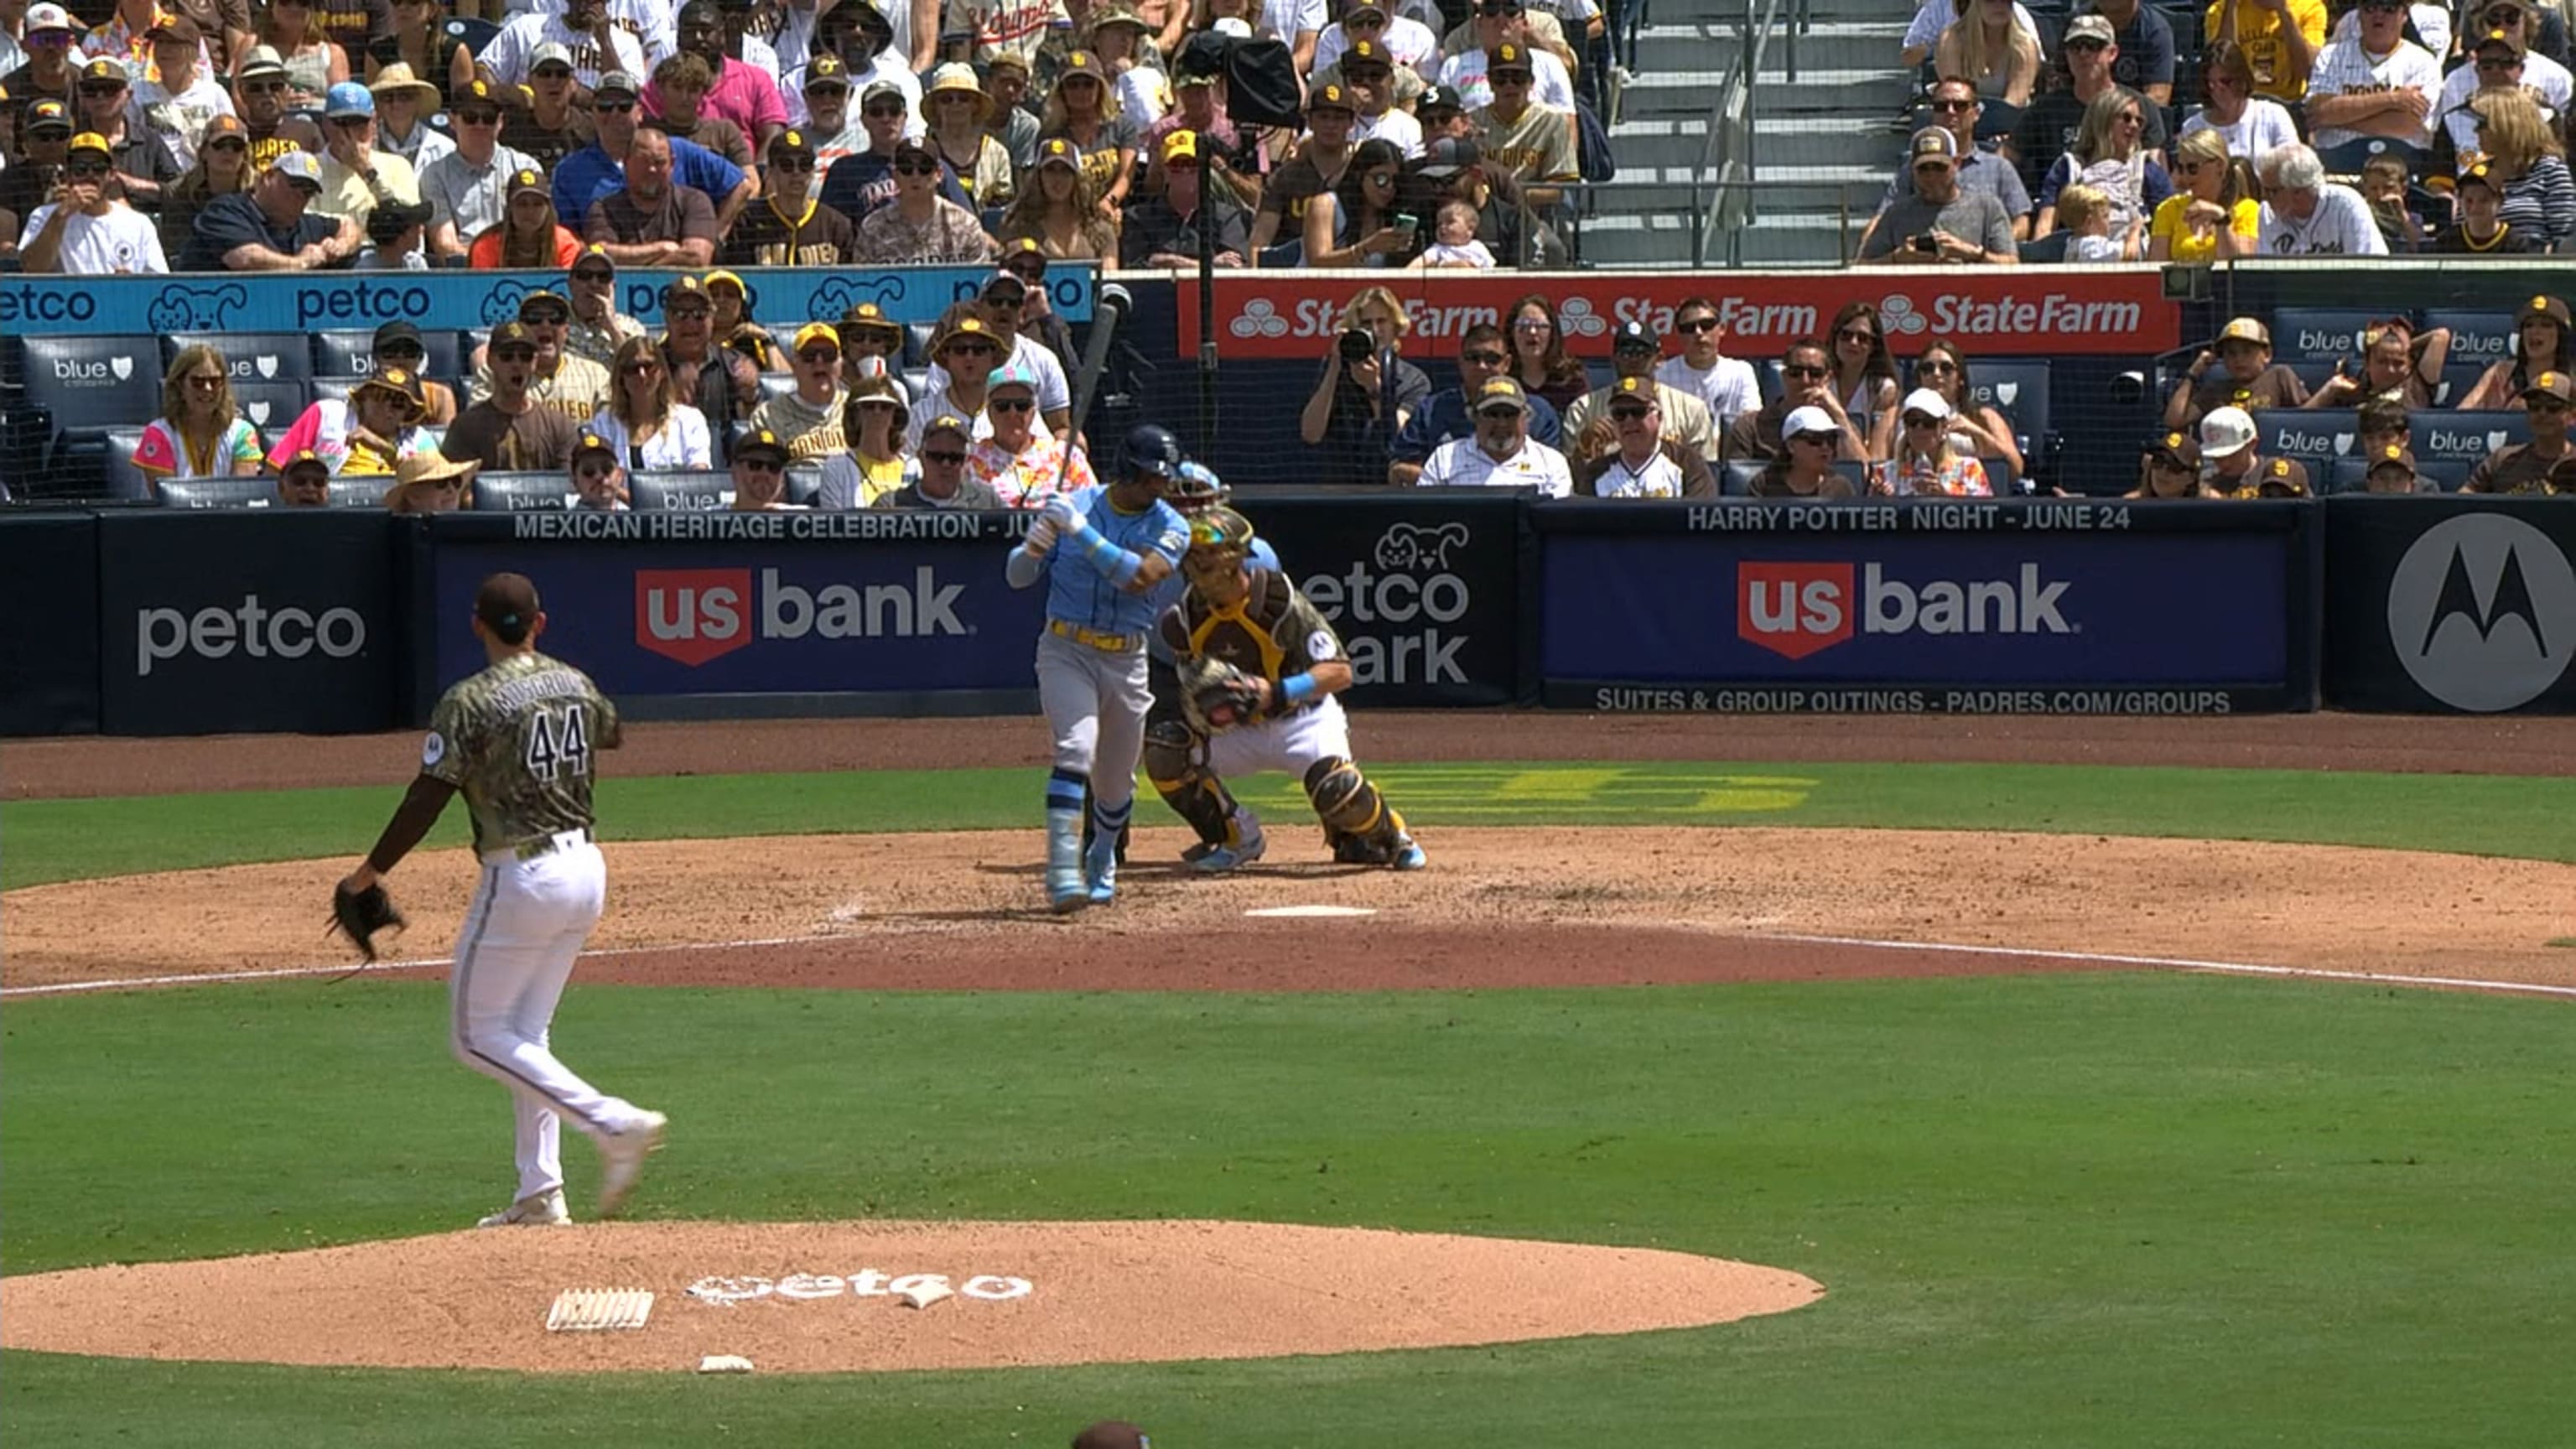 Petco Park sets new record for sell-out games with Padres sweep of